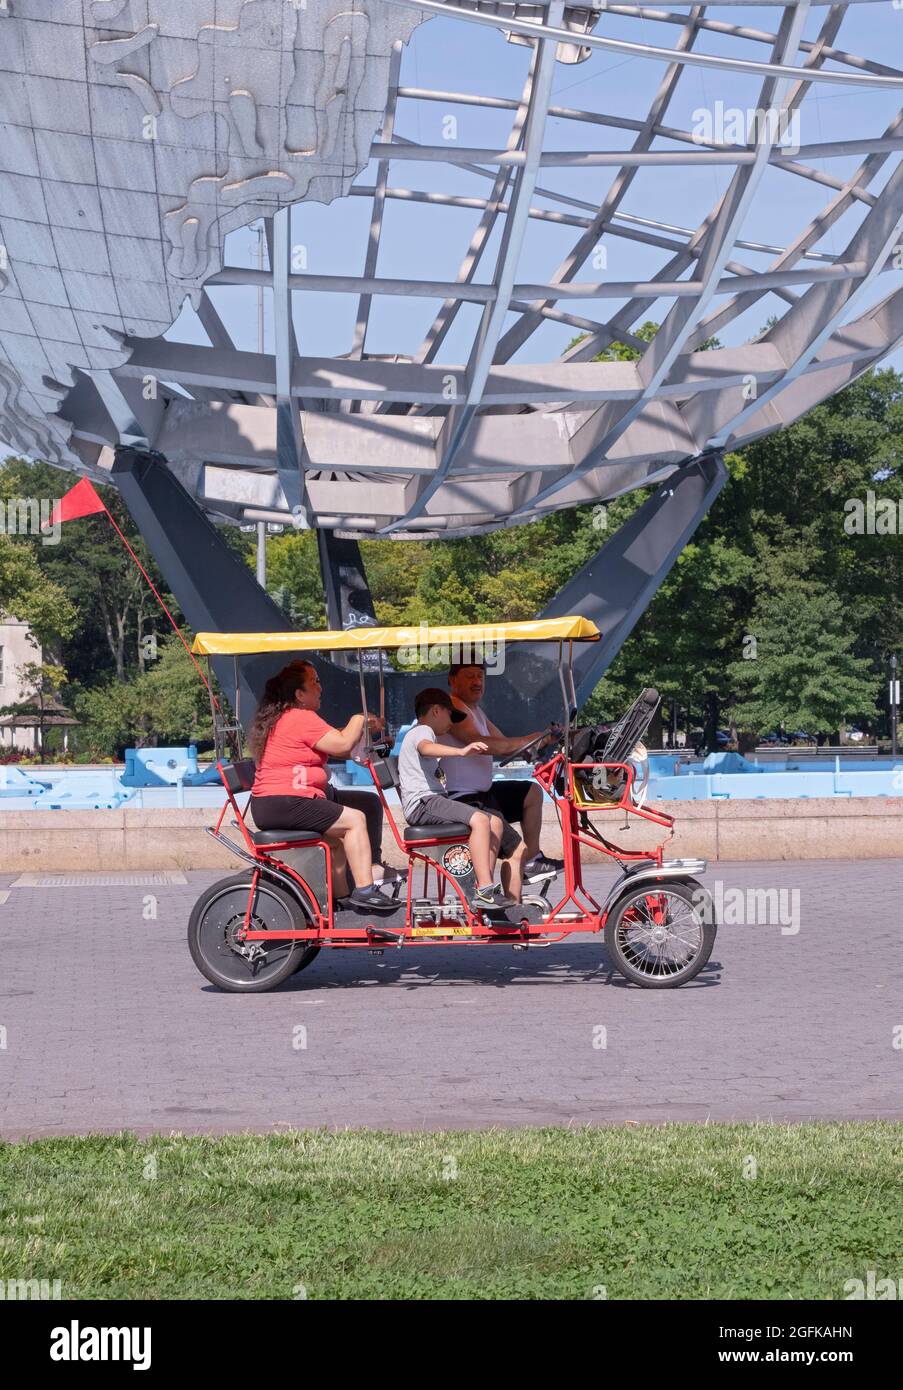 A family of four ride a rented Wheel Fun 4 wheel surrey cycle past the Unisphere in Flushing Meadows Corona Park in Queens, New York City. Stock Photo